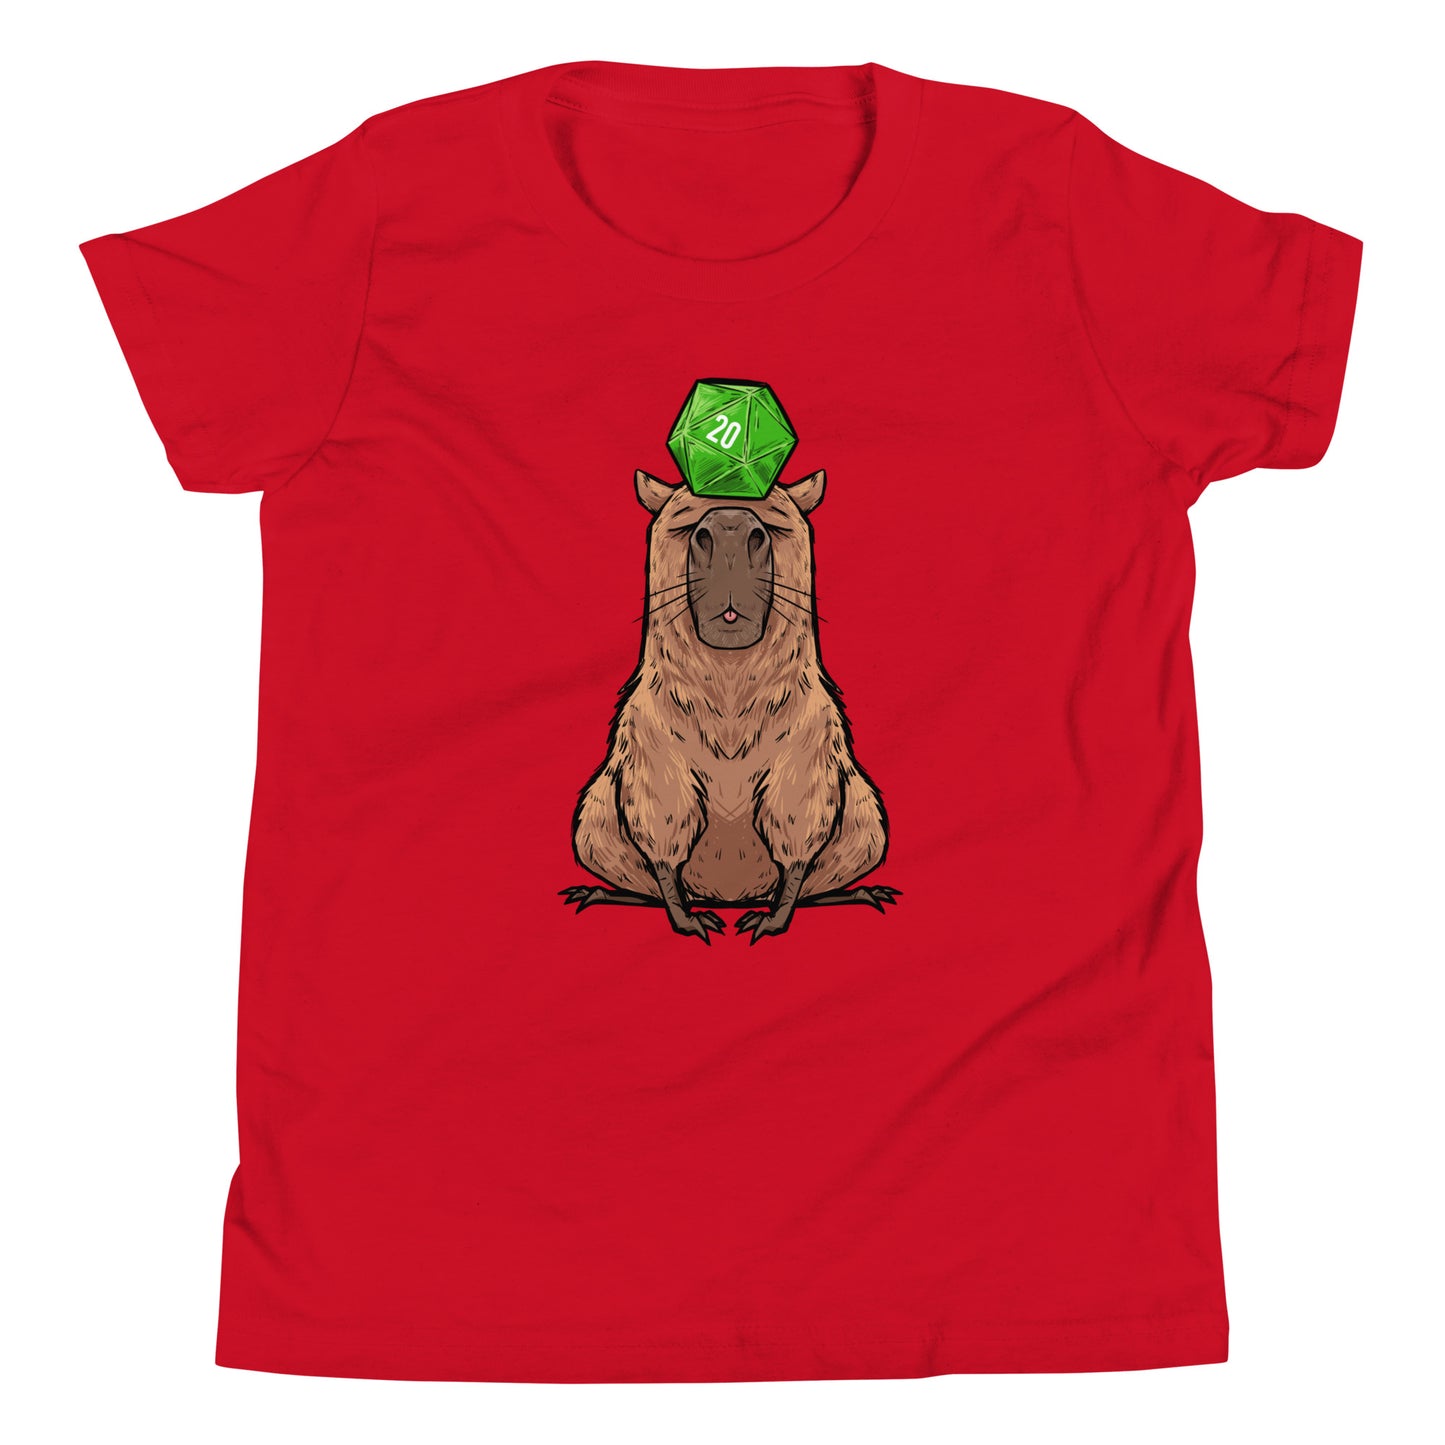 D20 Capybara Youth Short Sleeve T-Shirt  Level 1 Gamers Red S 